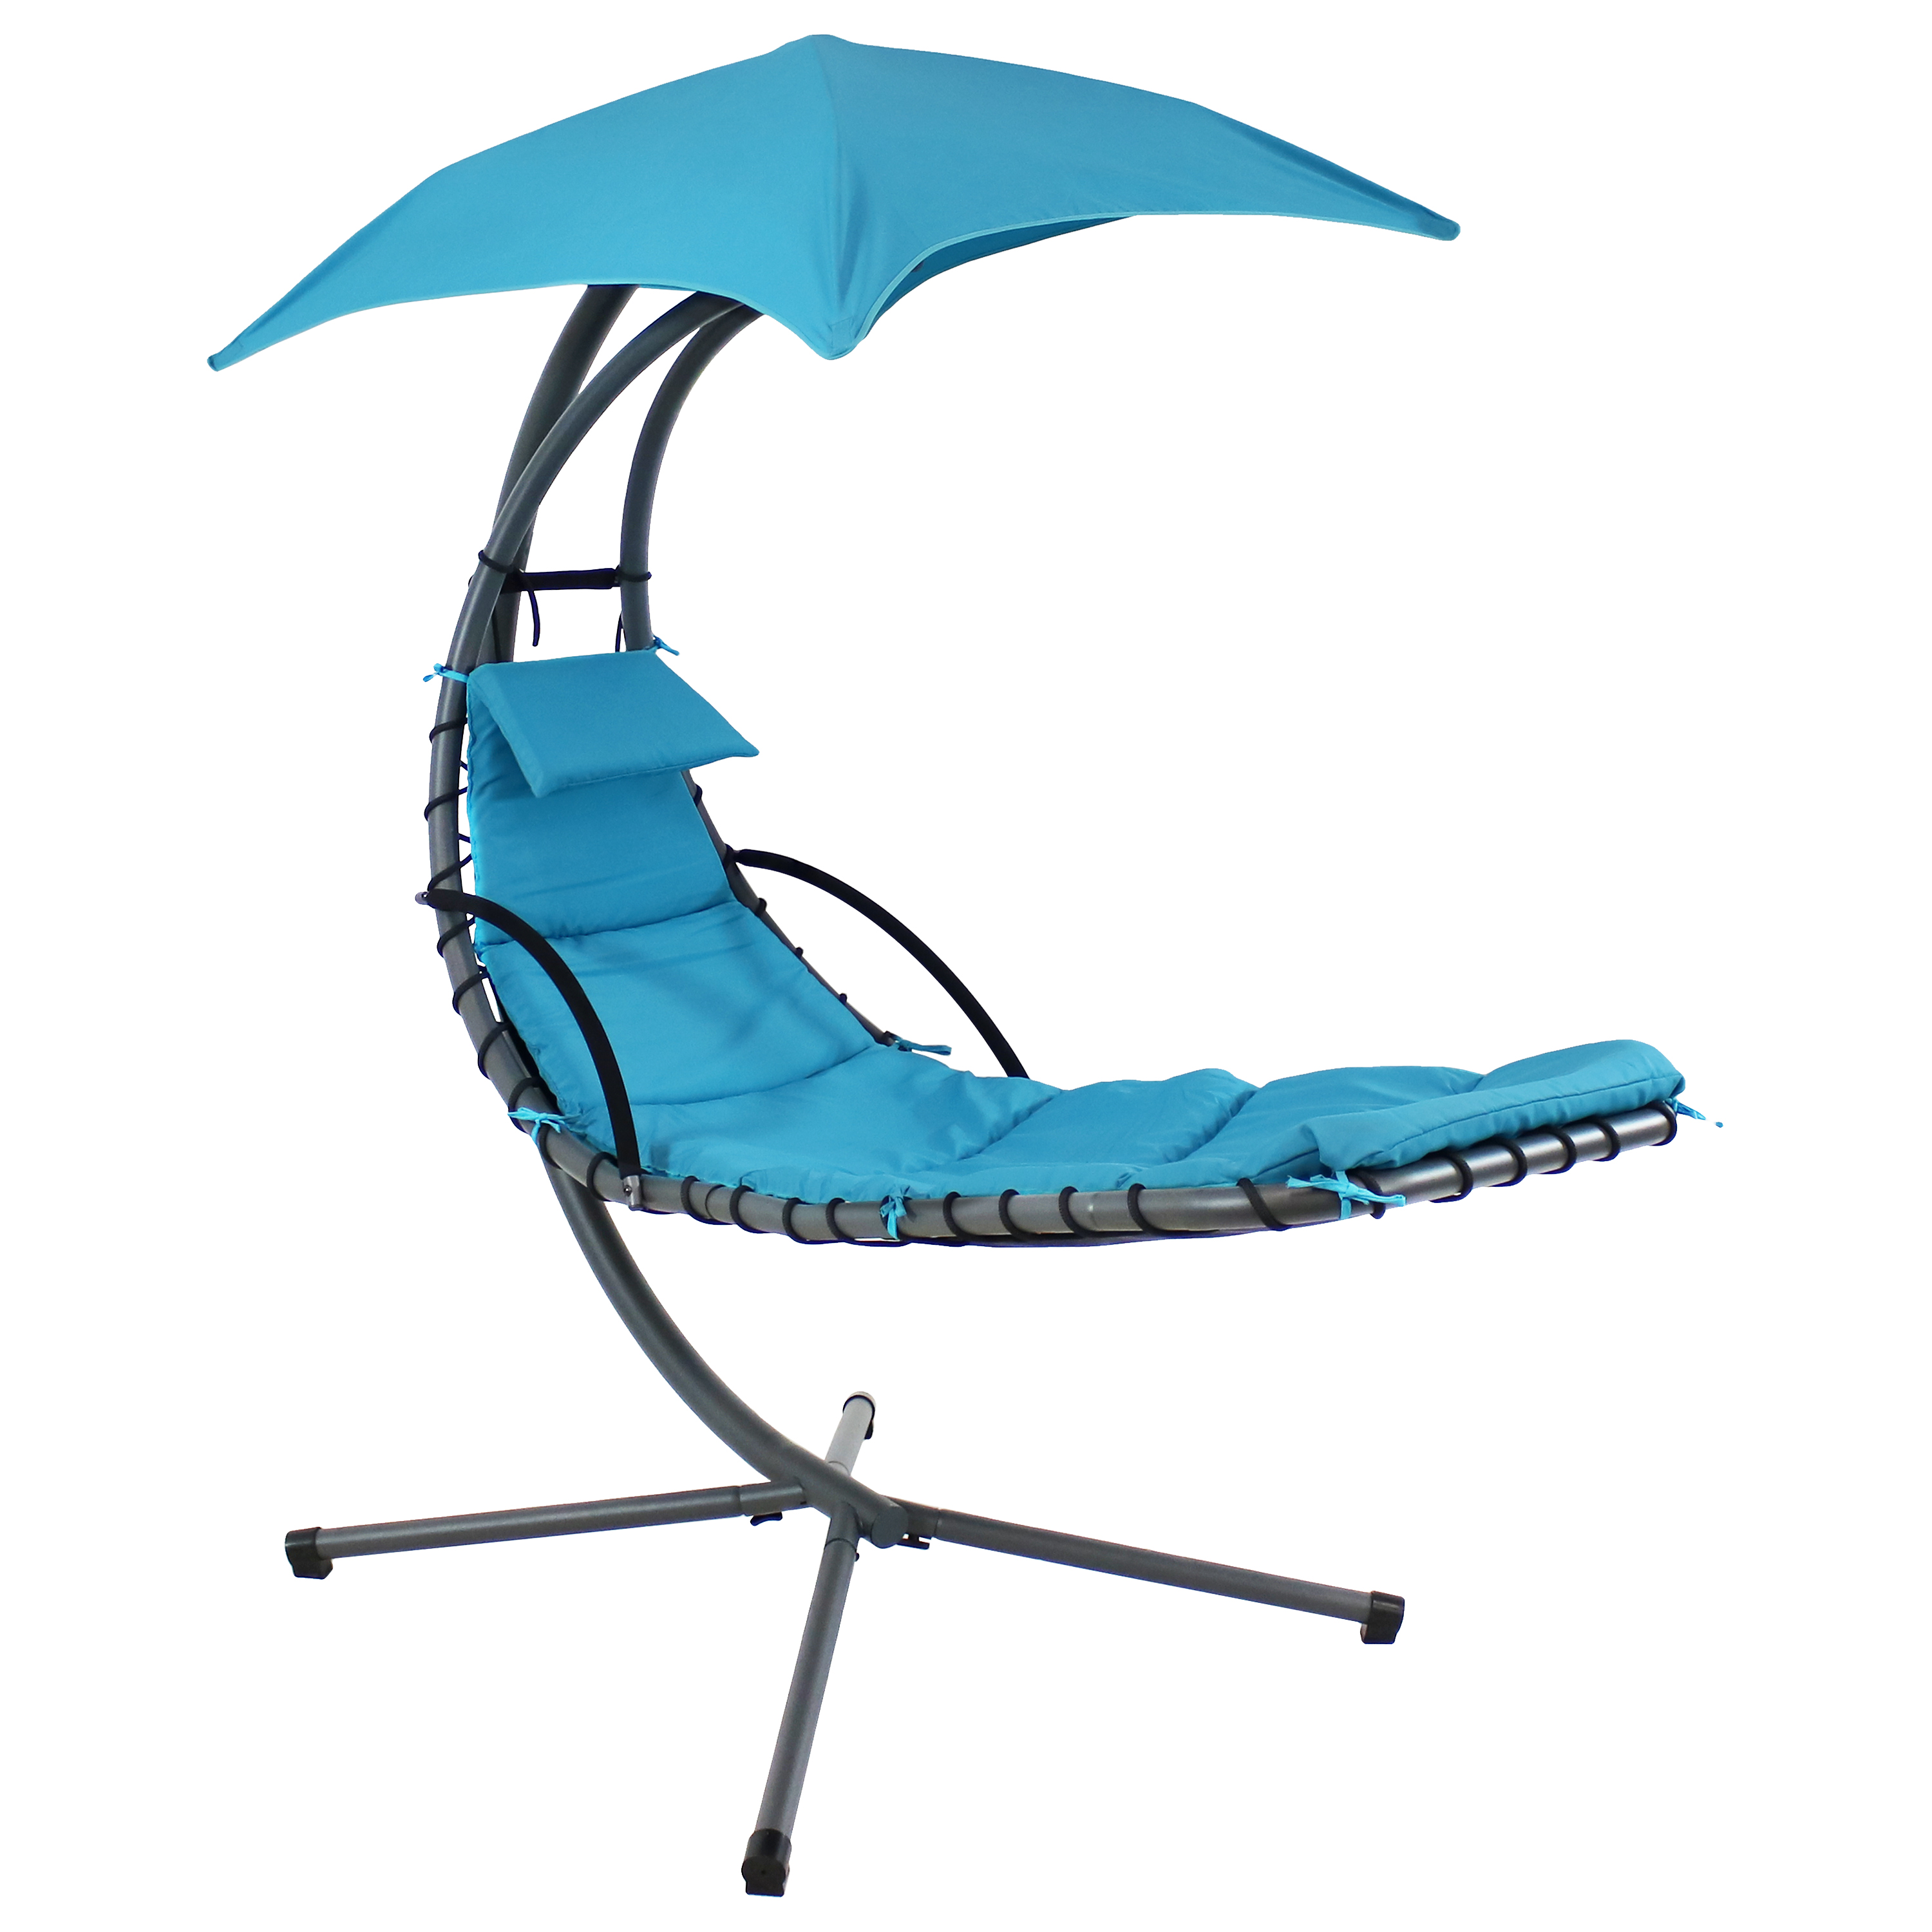 Sunnydaze Floating Chaise Lounge Chair, Teal